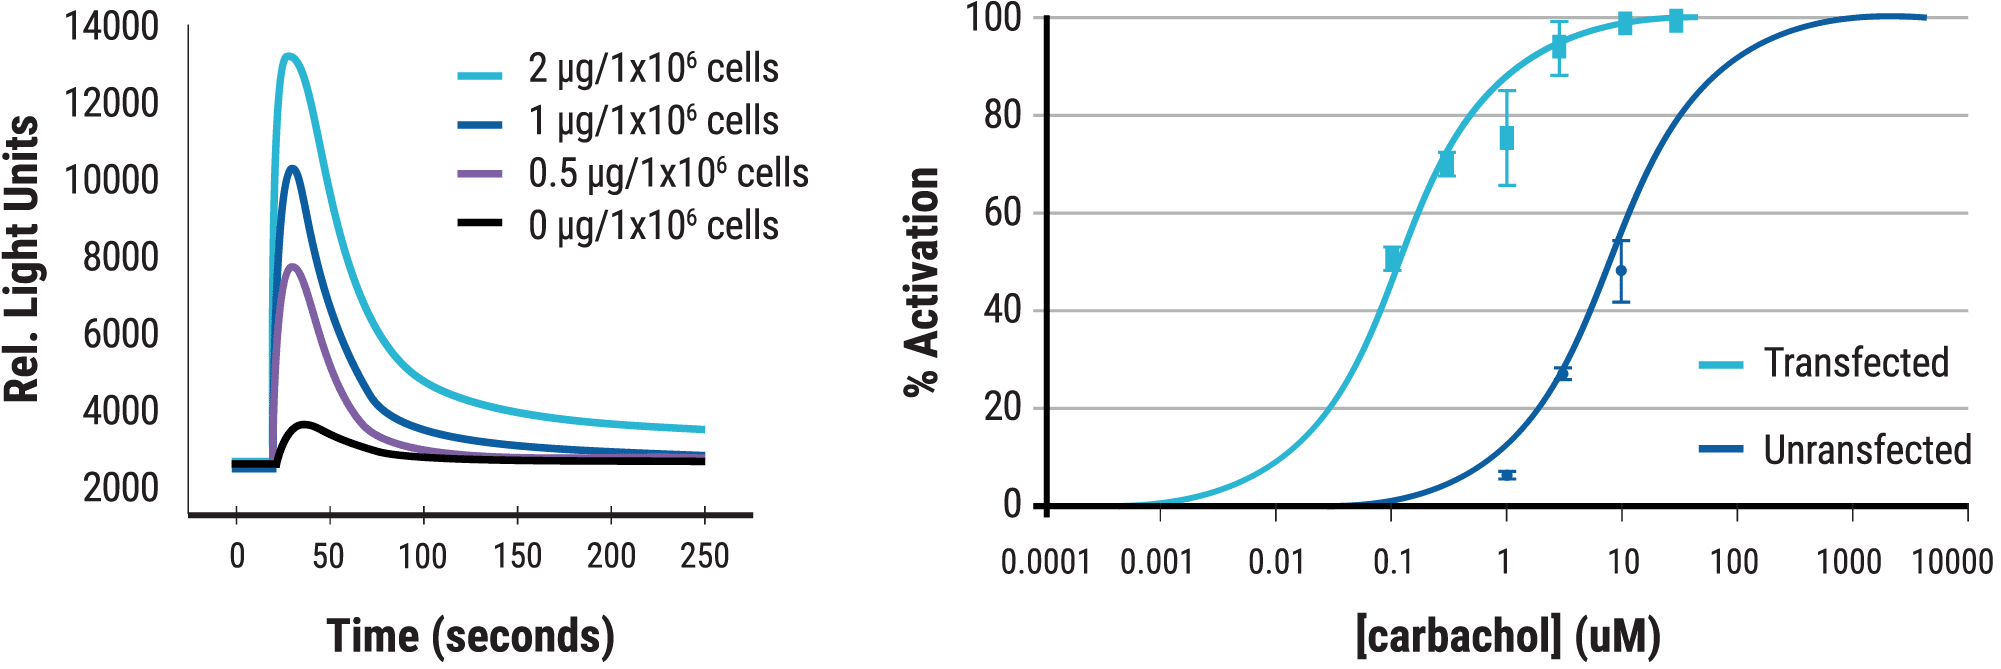 Rapid-Production-of-Assay-Ready-Cells-for-Drug-Discovery-Graph